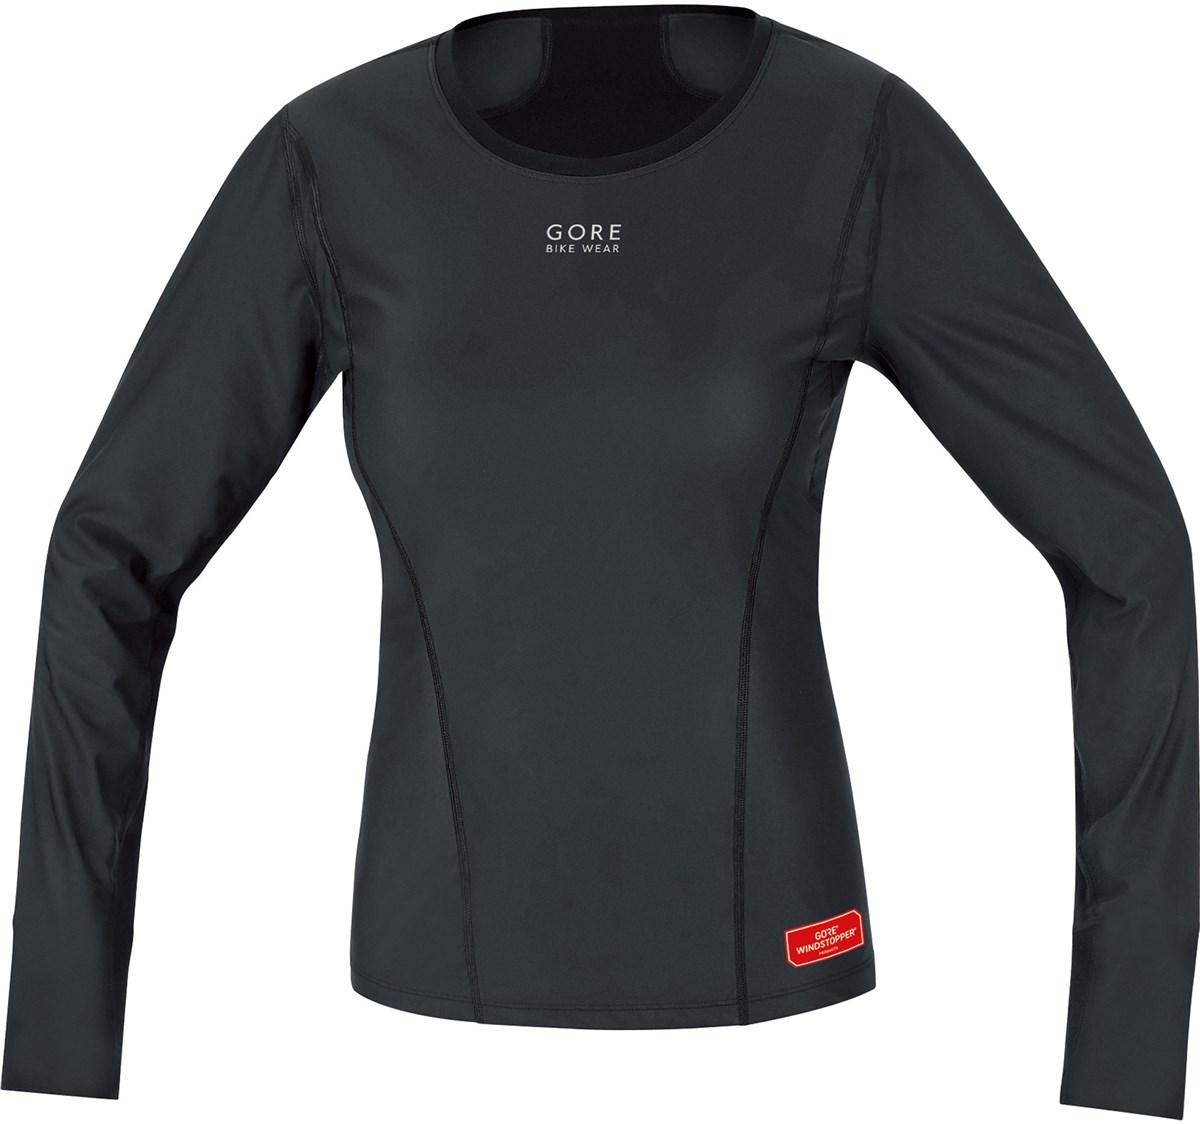 Gore Windstopper Shirt Womens Long Sleeve Base Layer AW17 product image